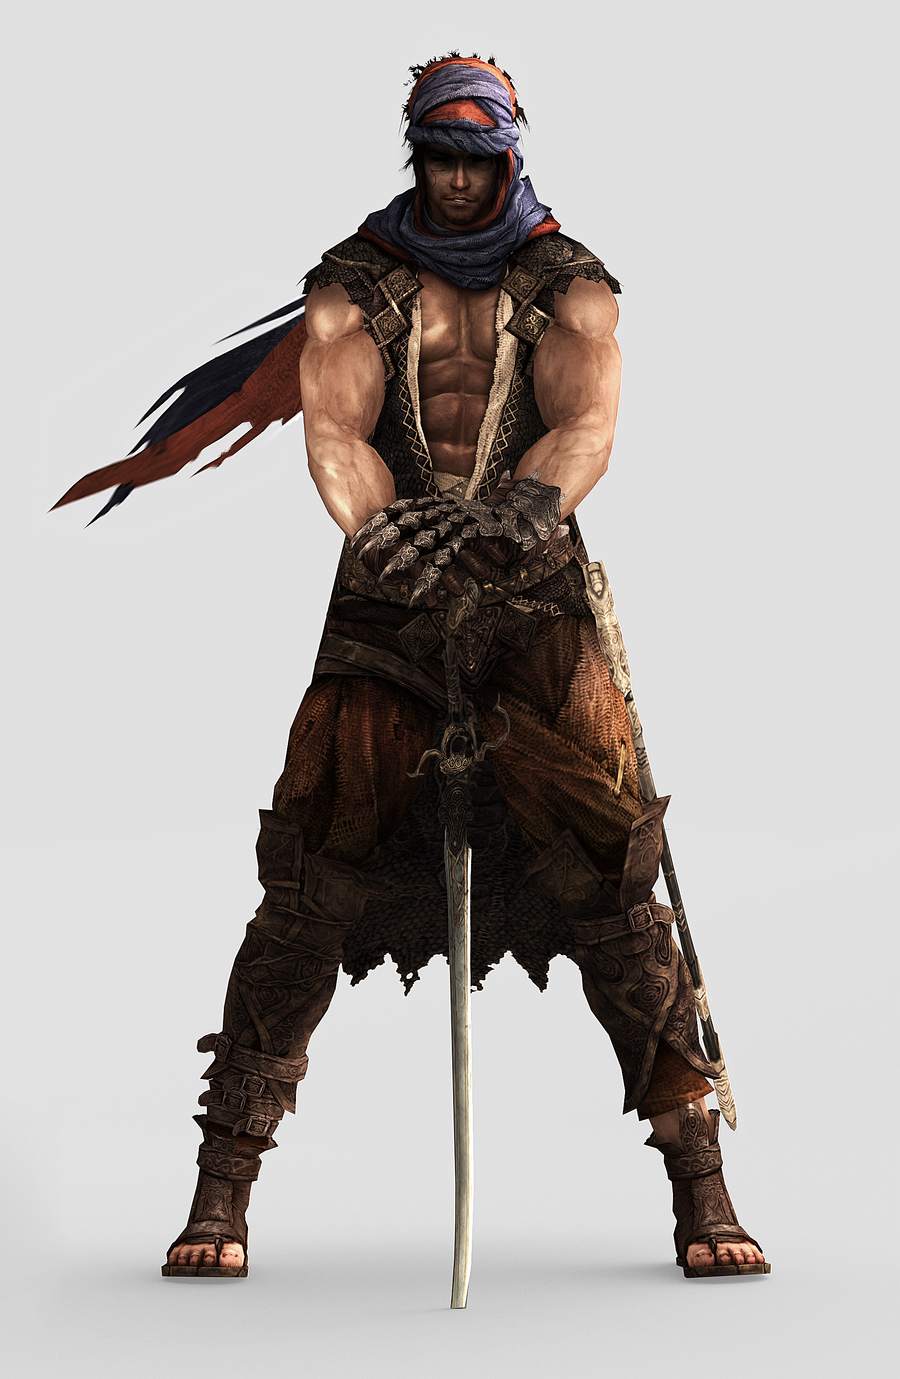 [Image: prince_of_persia_2008_by_daemoncollection-d4p99df.png]